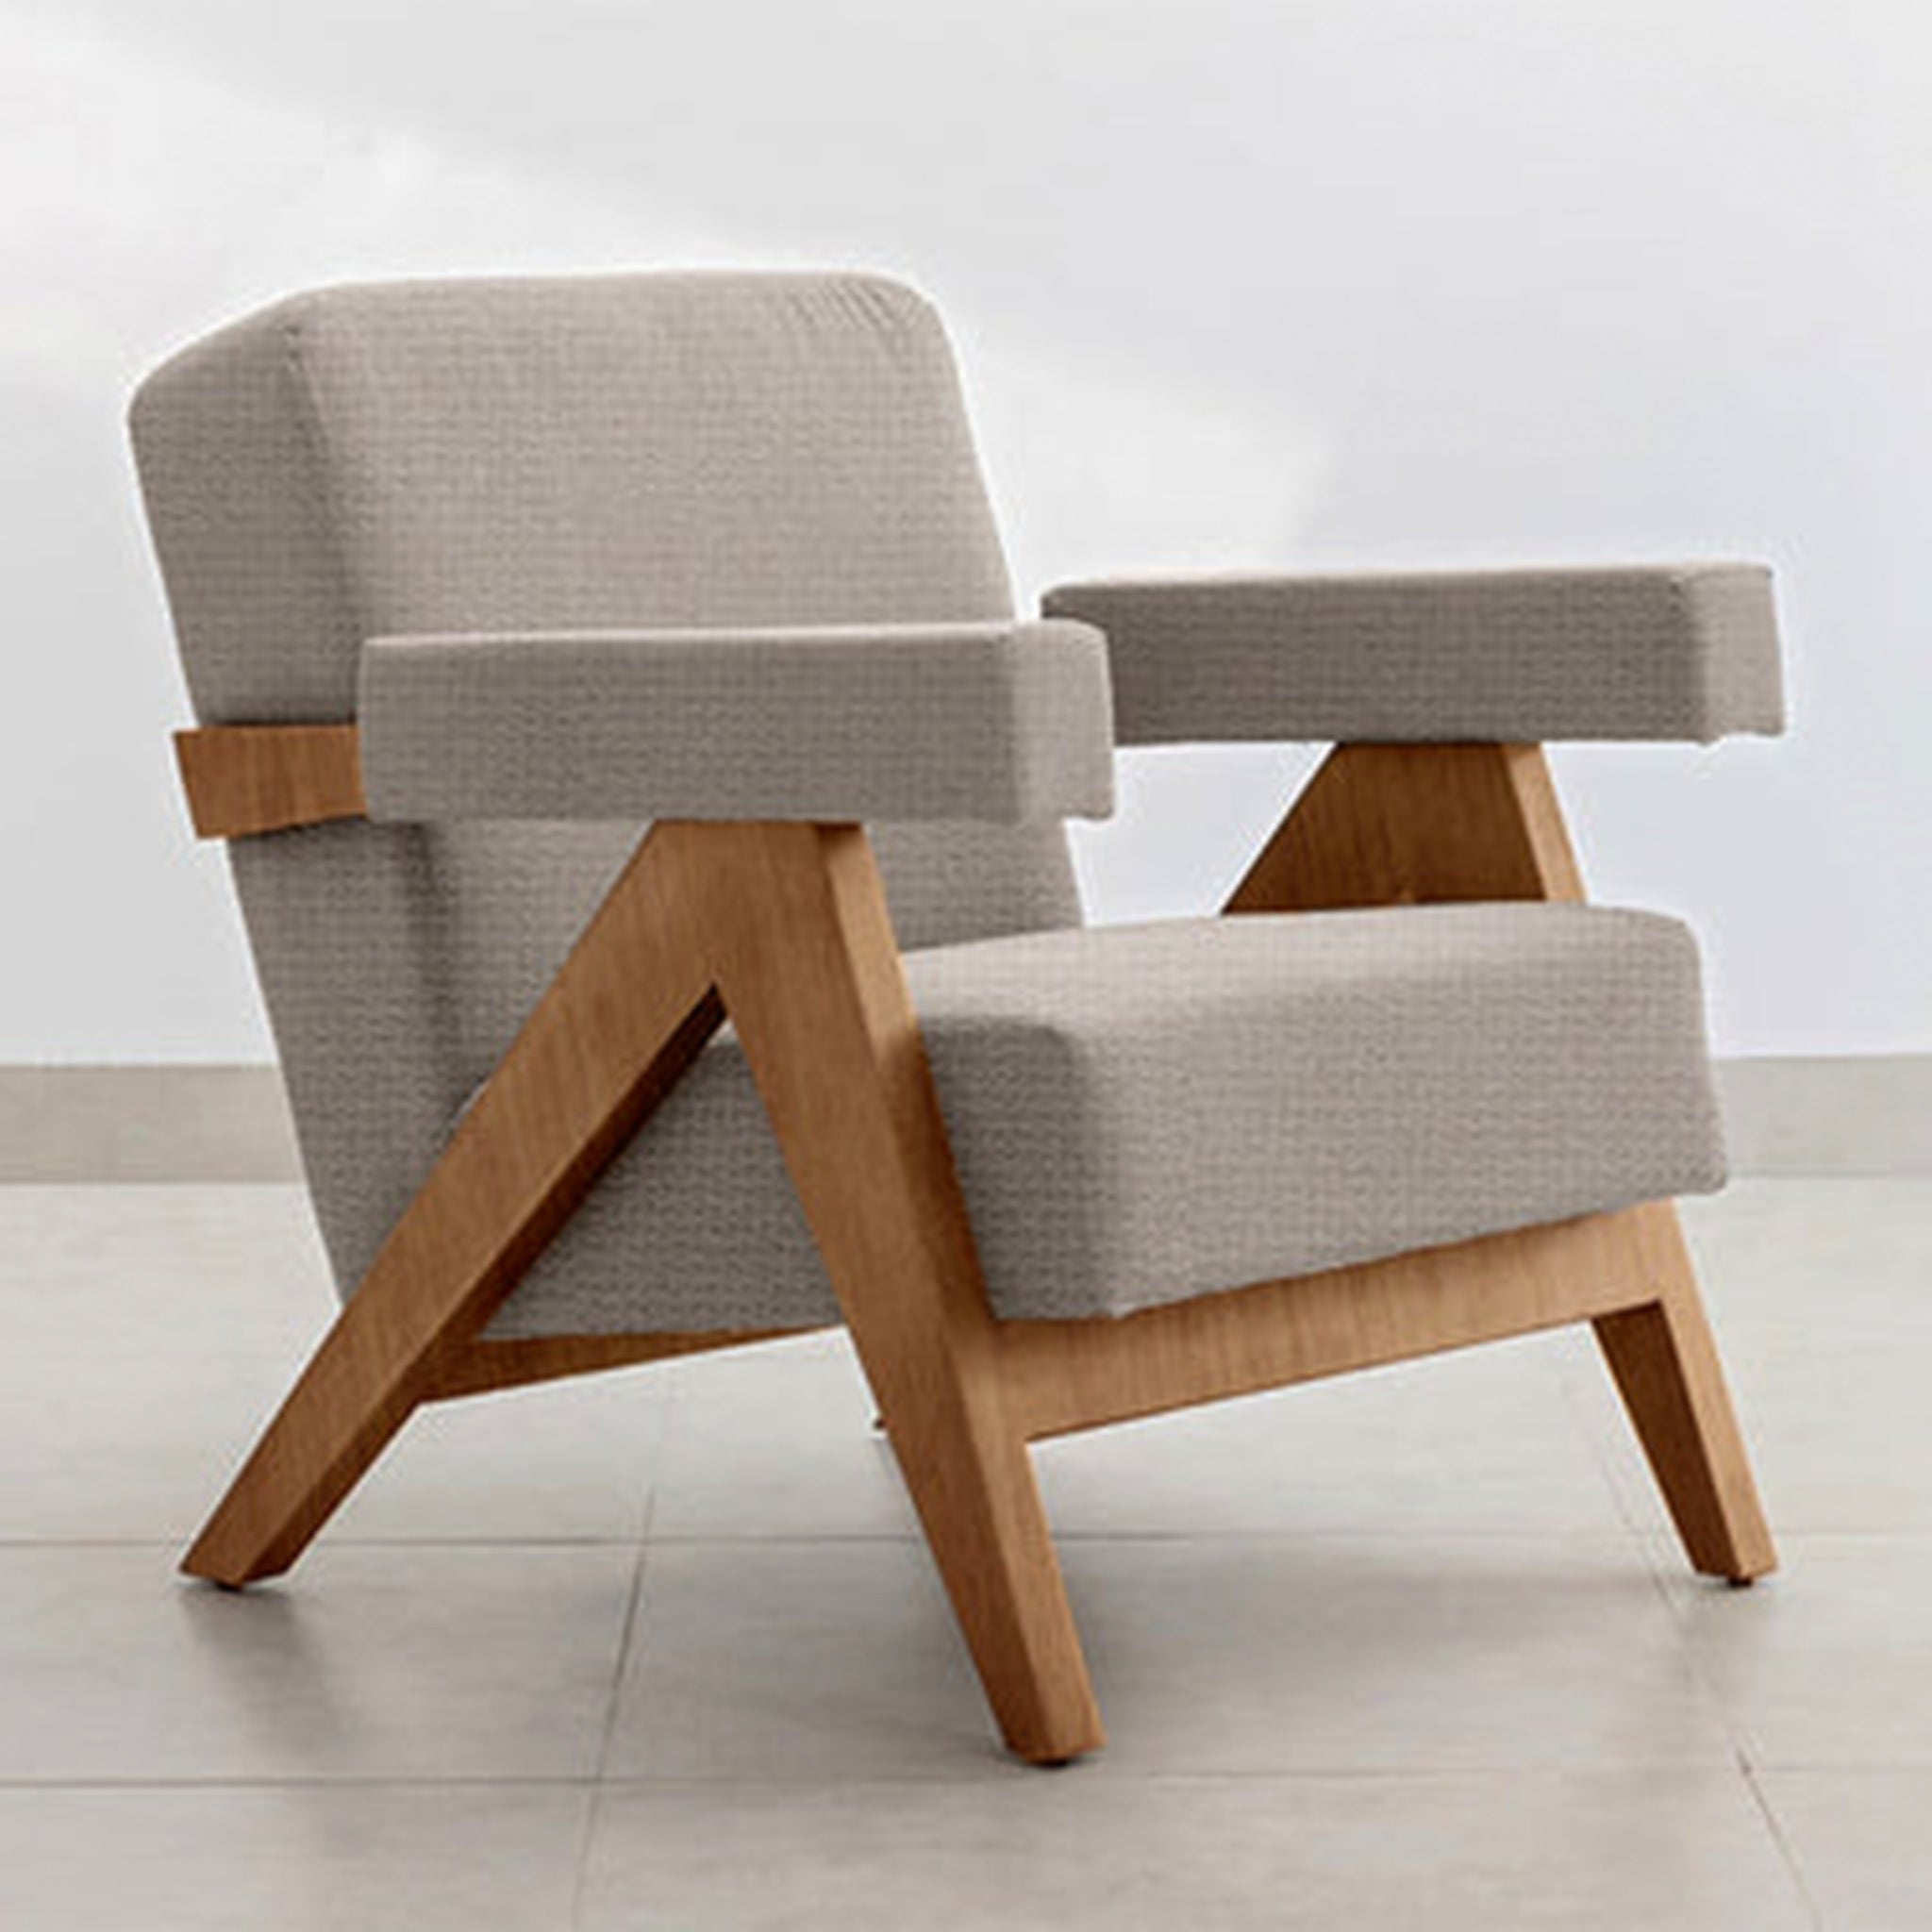 The Pierre Accent Chair showcasing a unique blend of wood and teal fabric.